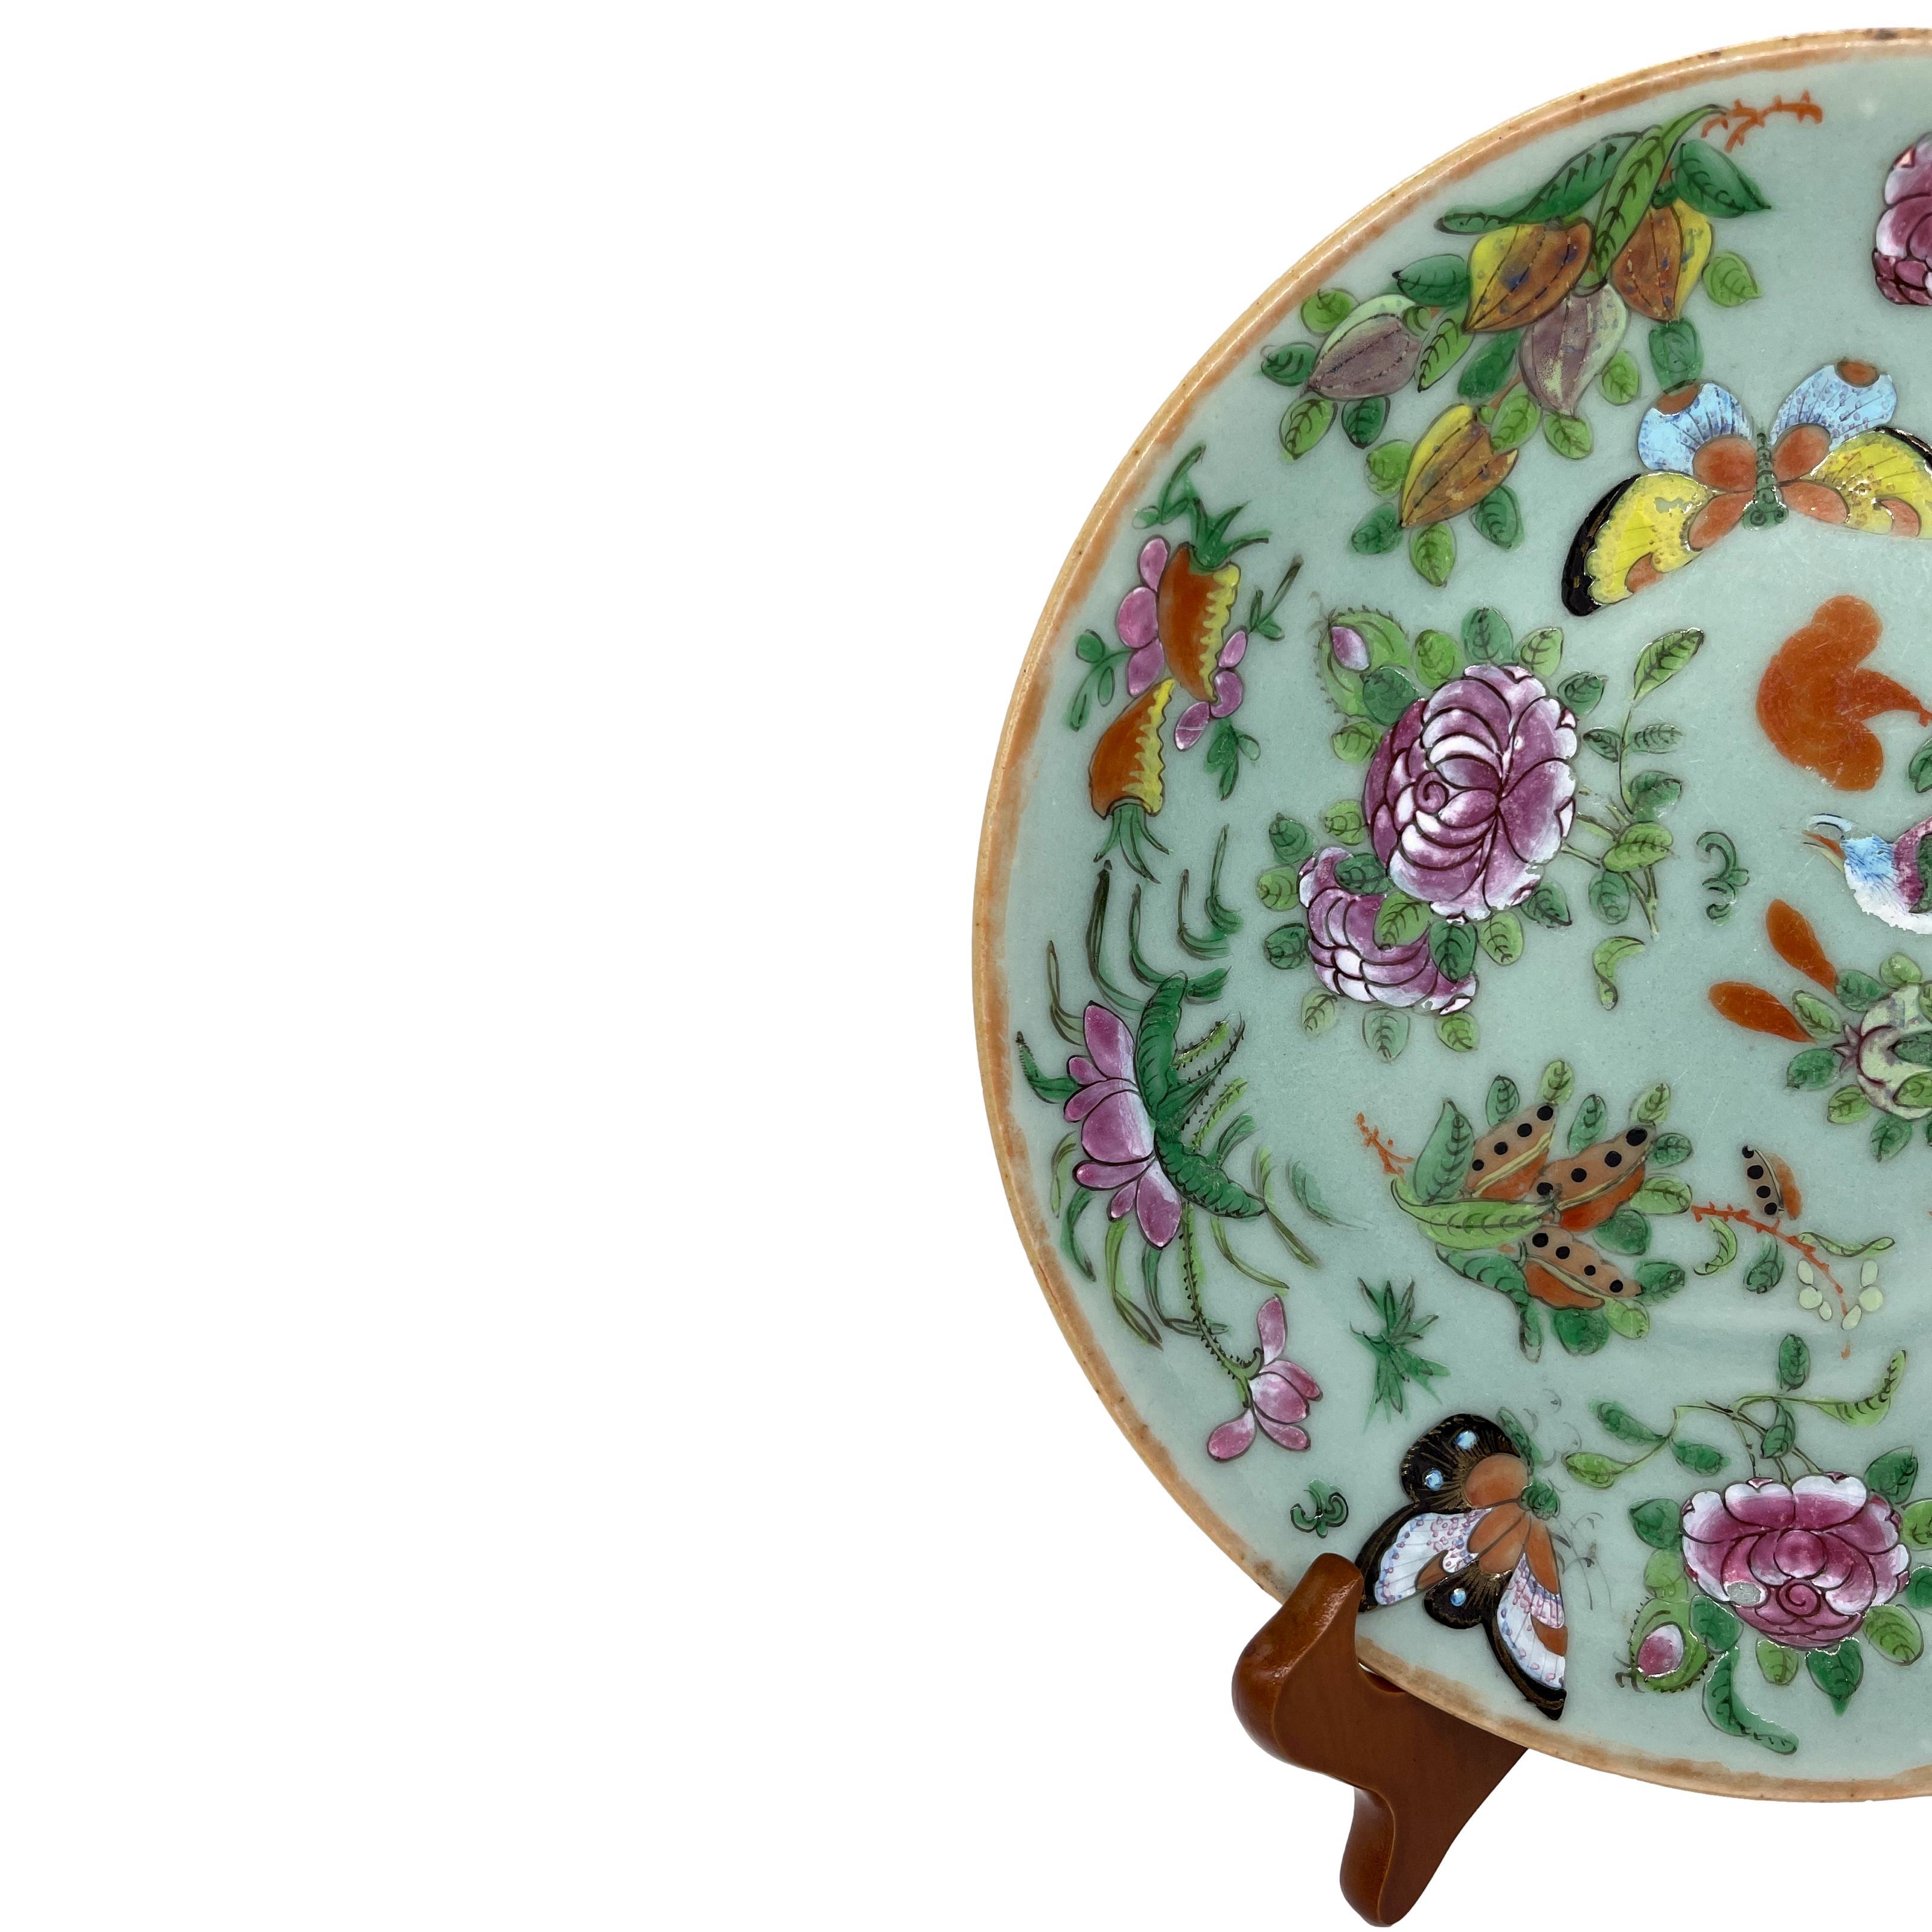 Enameled Canton Famille Rose Chinese Export Porcelain Celadon-Ground 10-In Plate